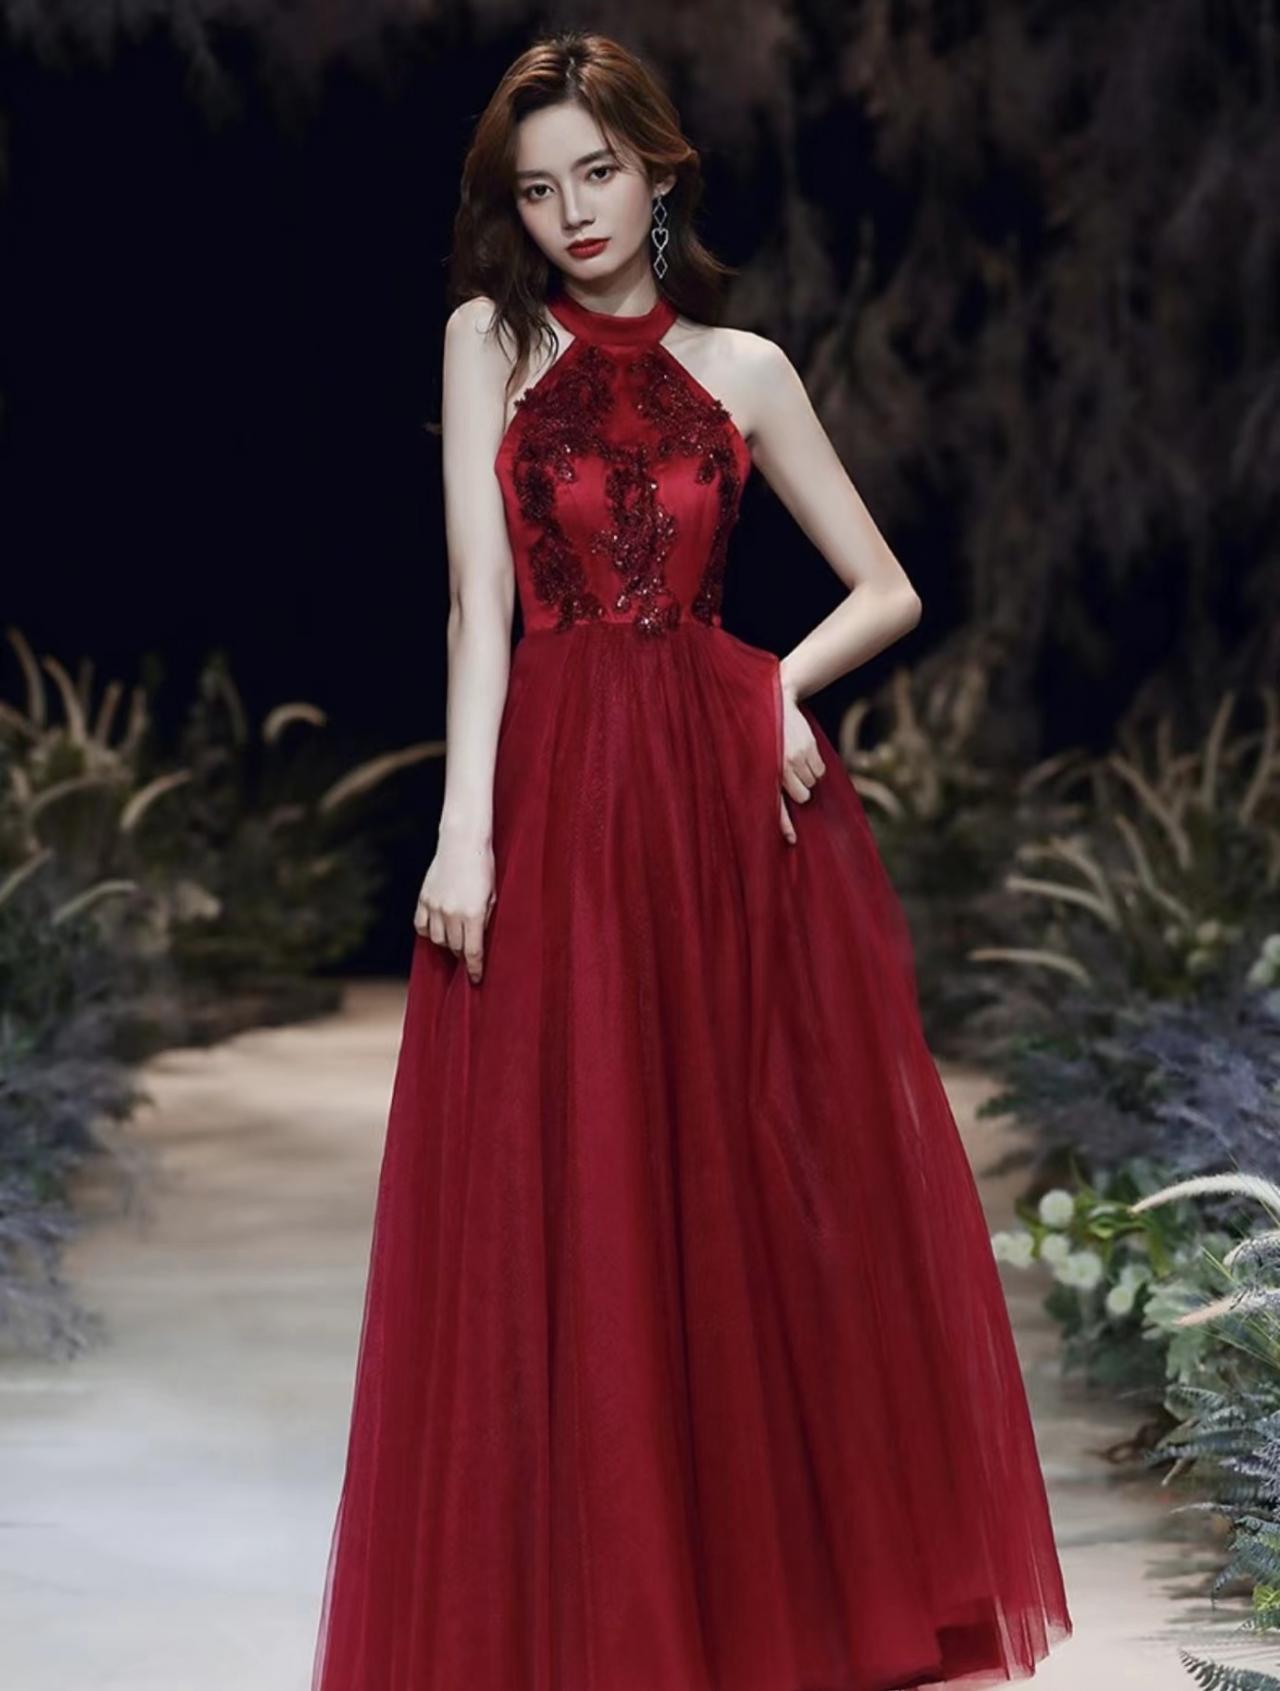 Halter Neck Tulle Party Dress, Sexy Red Prom Dress